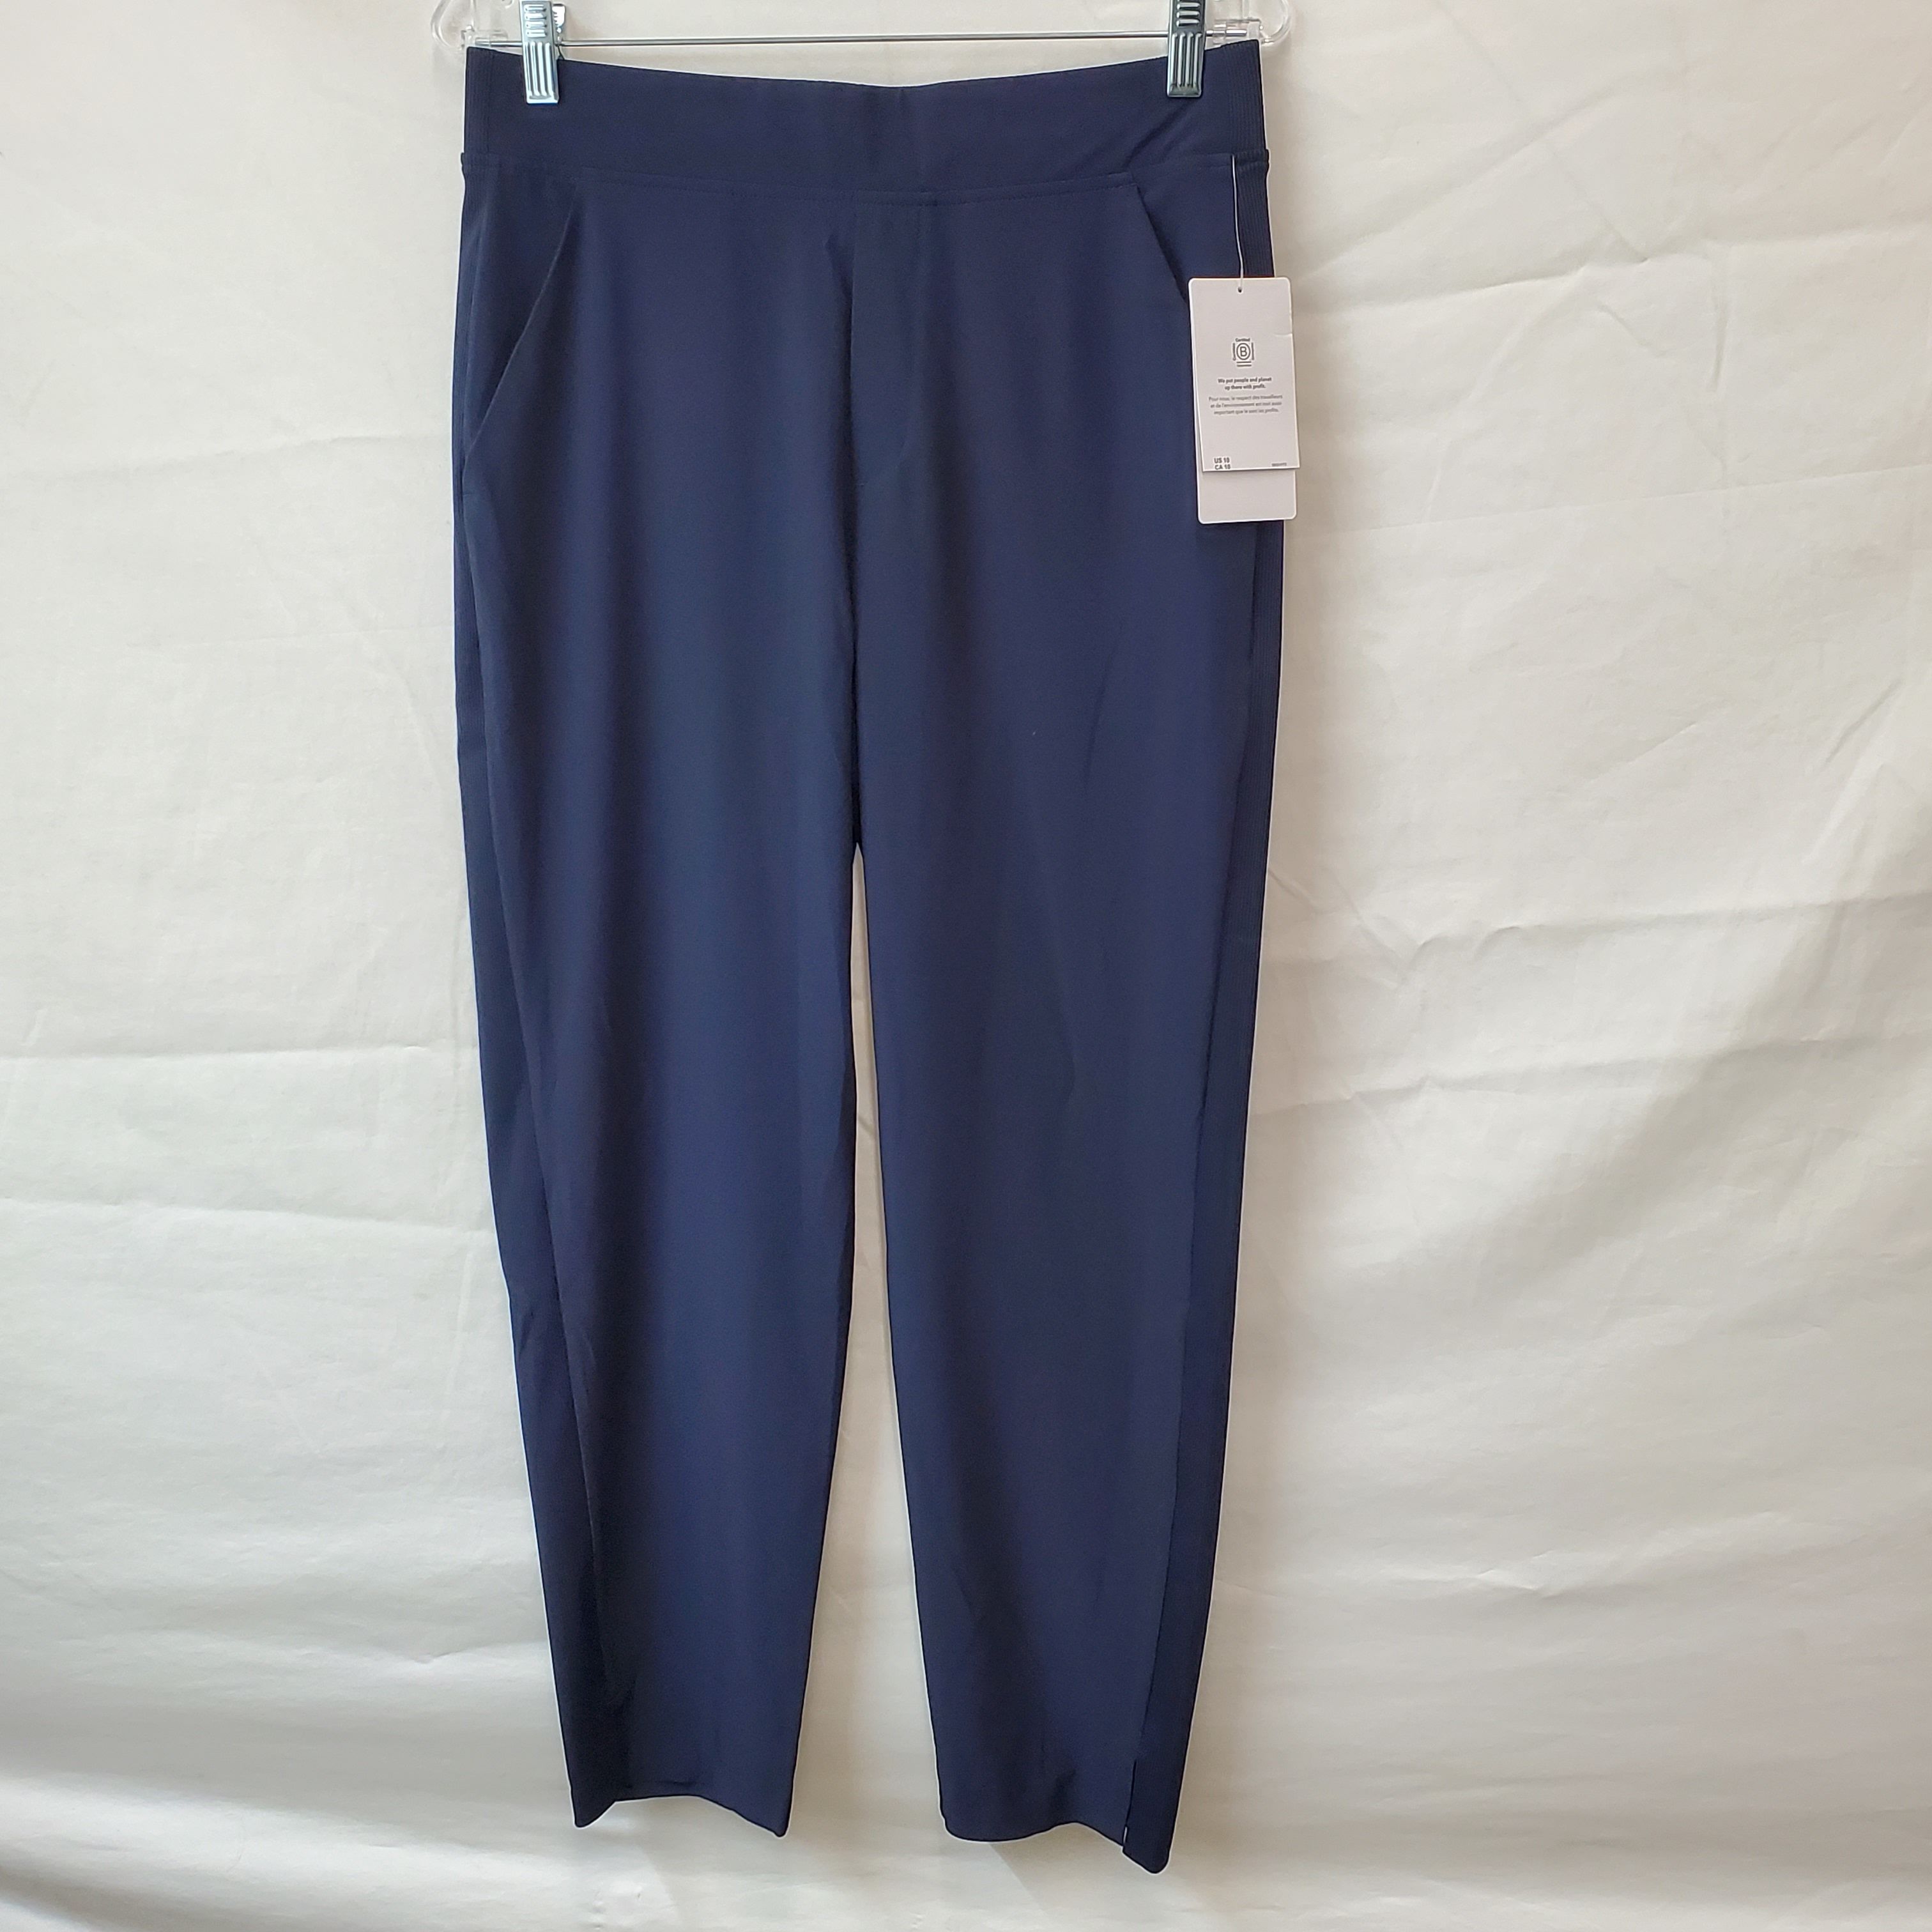 Buy the Athleta Brooklyn Ankle Pants Size 10